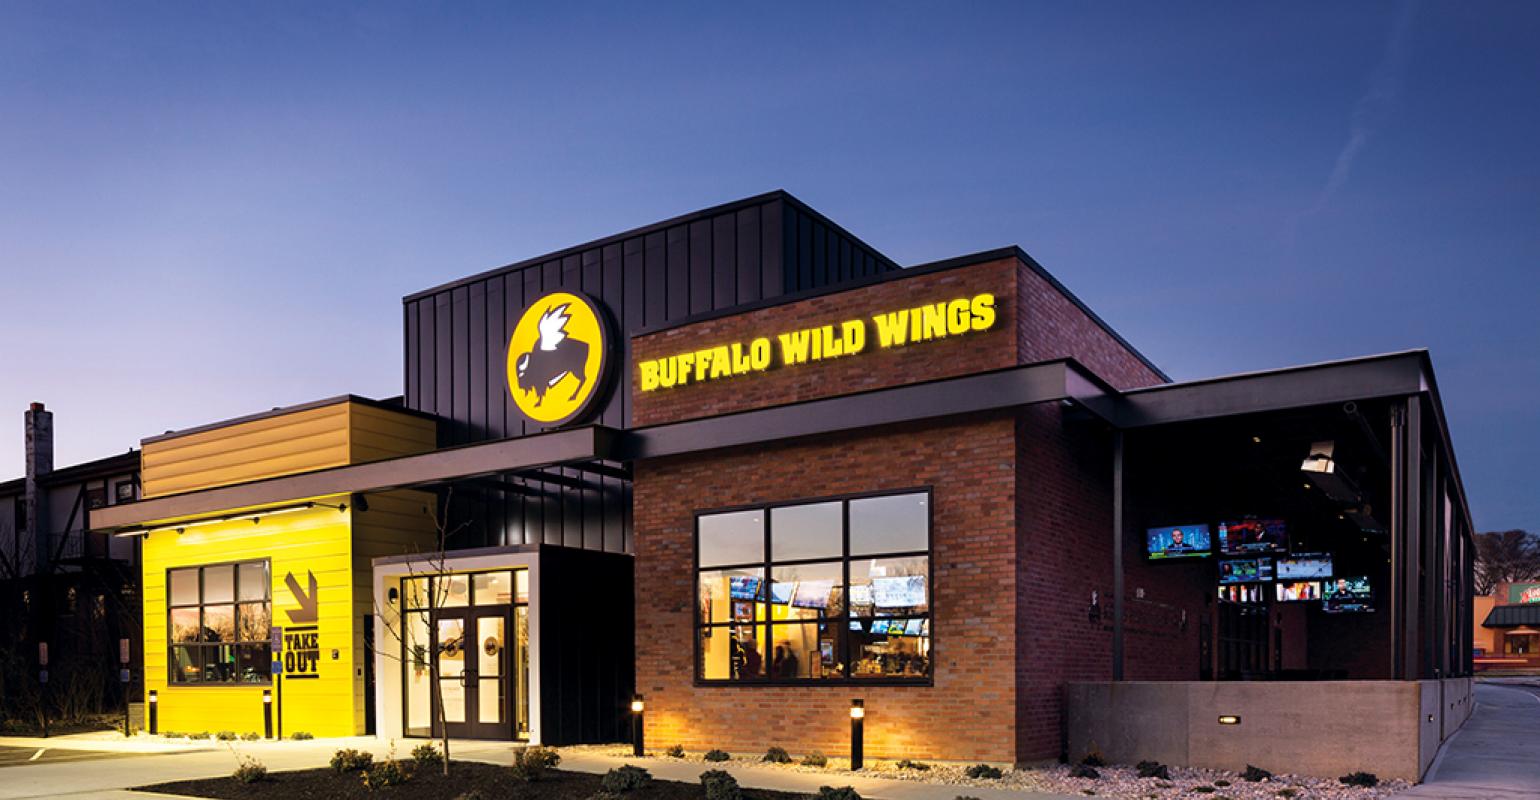 Buffalo Wild Wings to at least 60 locations | Nation's Restaurant News